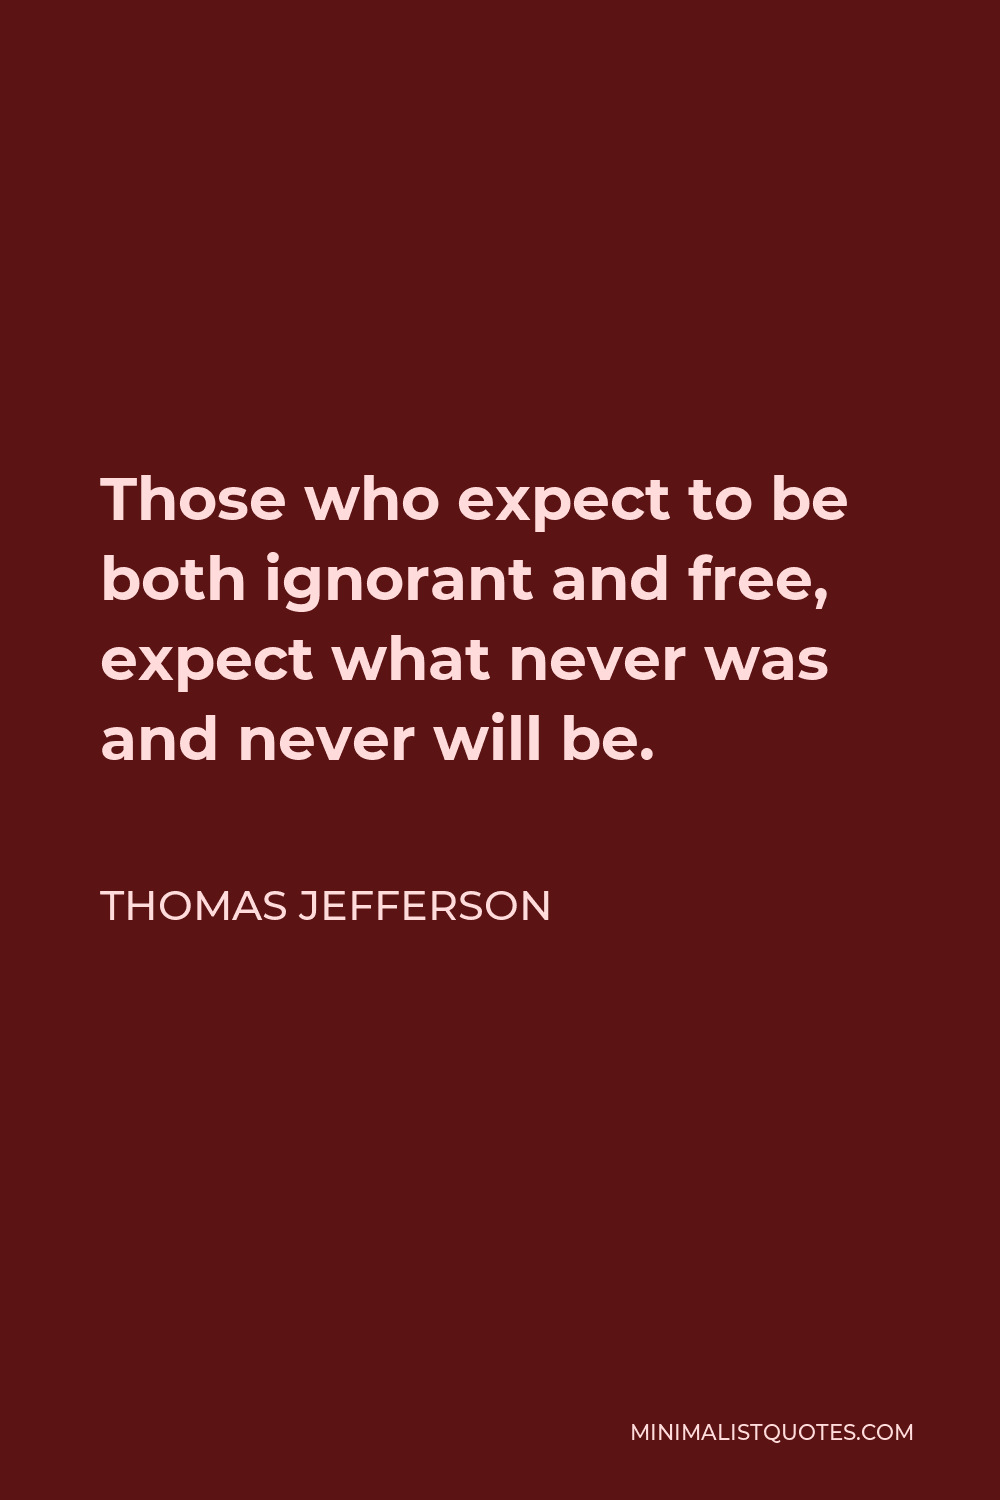 Thomas Jefferson Quote - Those who expect to be both ignorant and free, expect what never was and never will be.